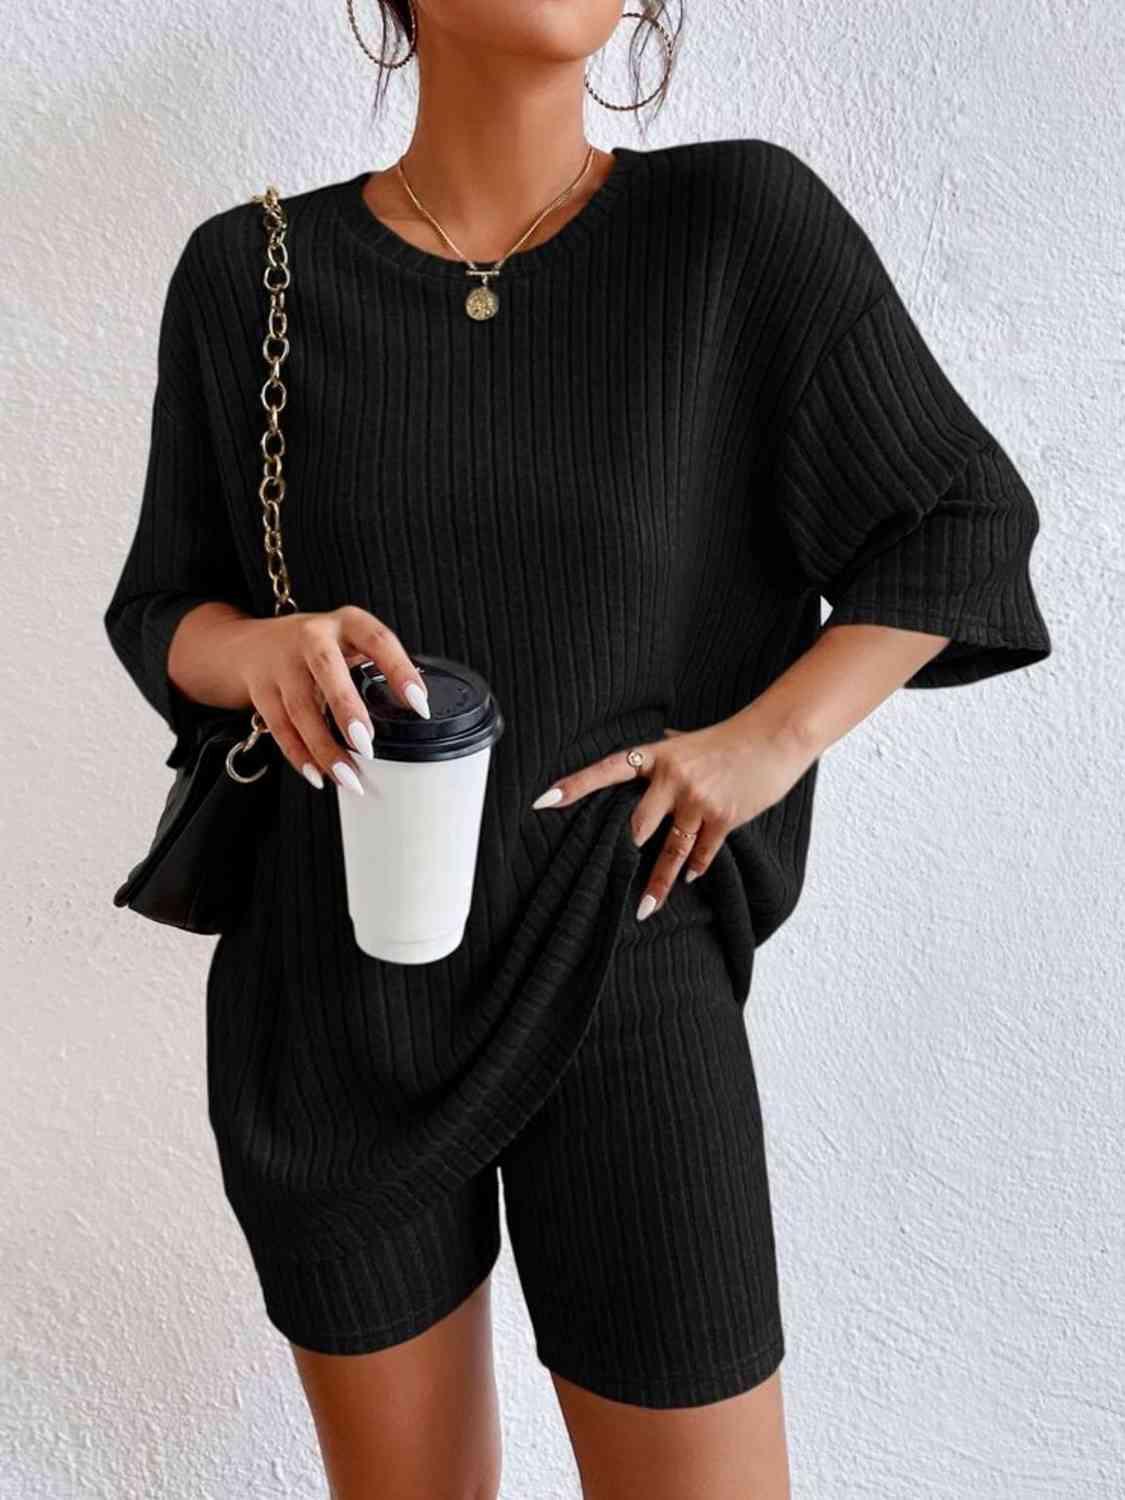 a woman wearing a black sweater and shorts holding a coffee cup